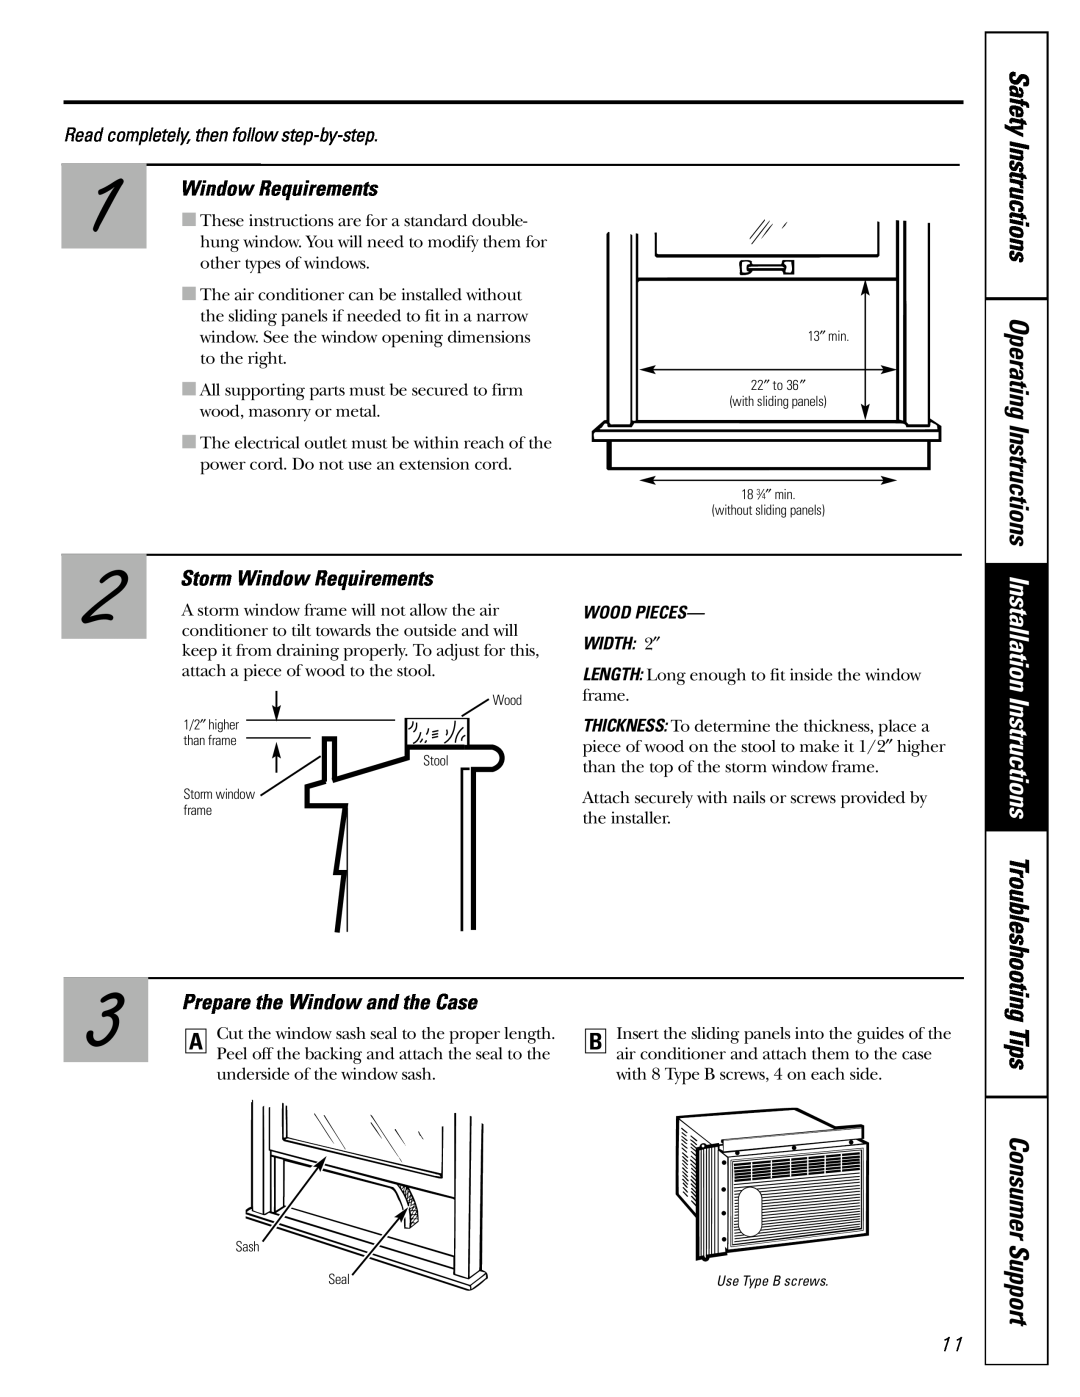 GE AGMO5 Safety Instructions Operating Instructions, Storm Window Requirements, Prepare the Window and the Case 